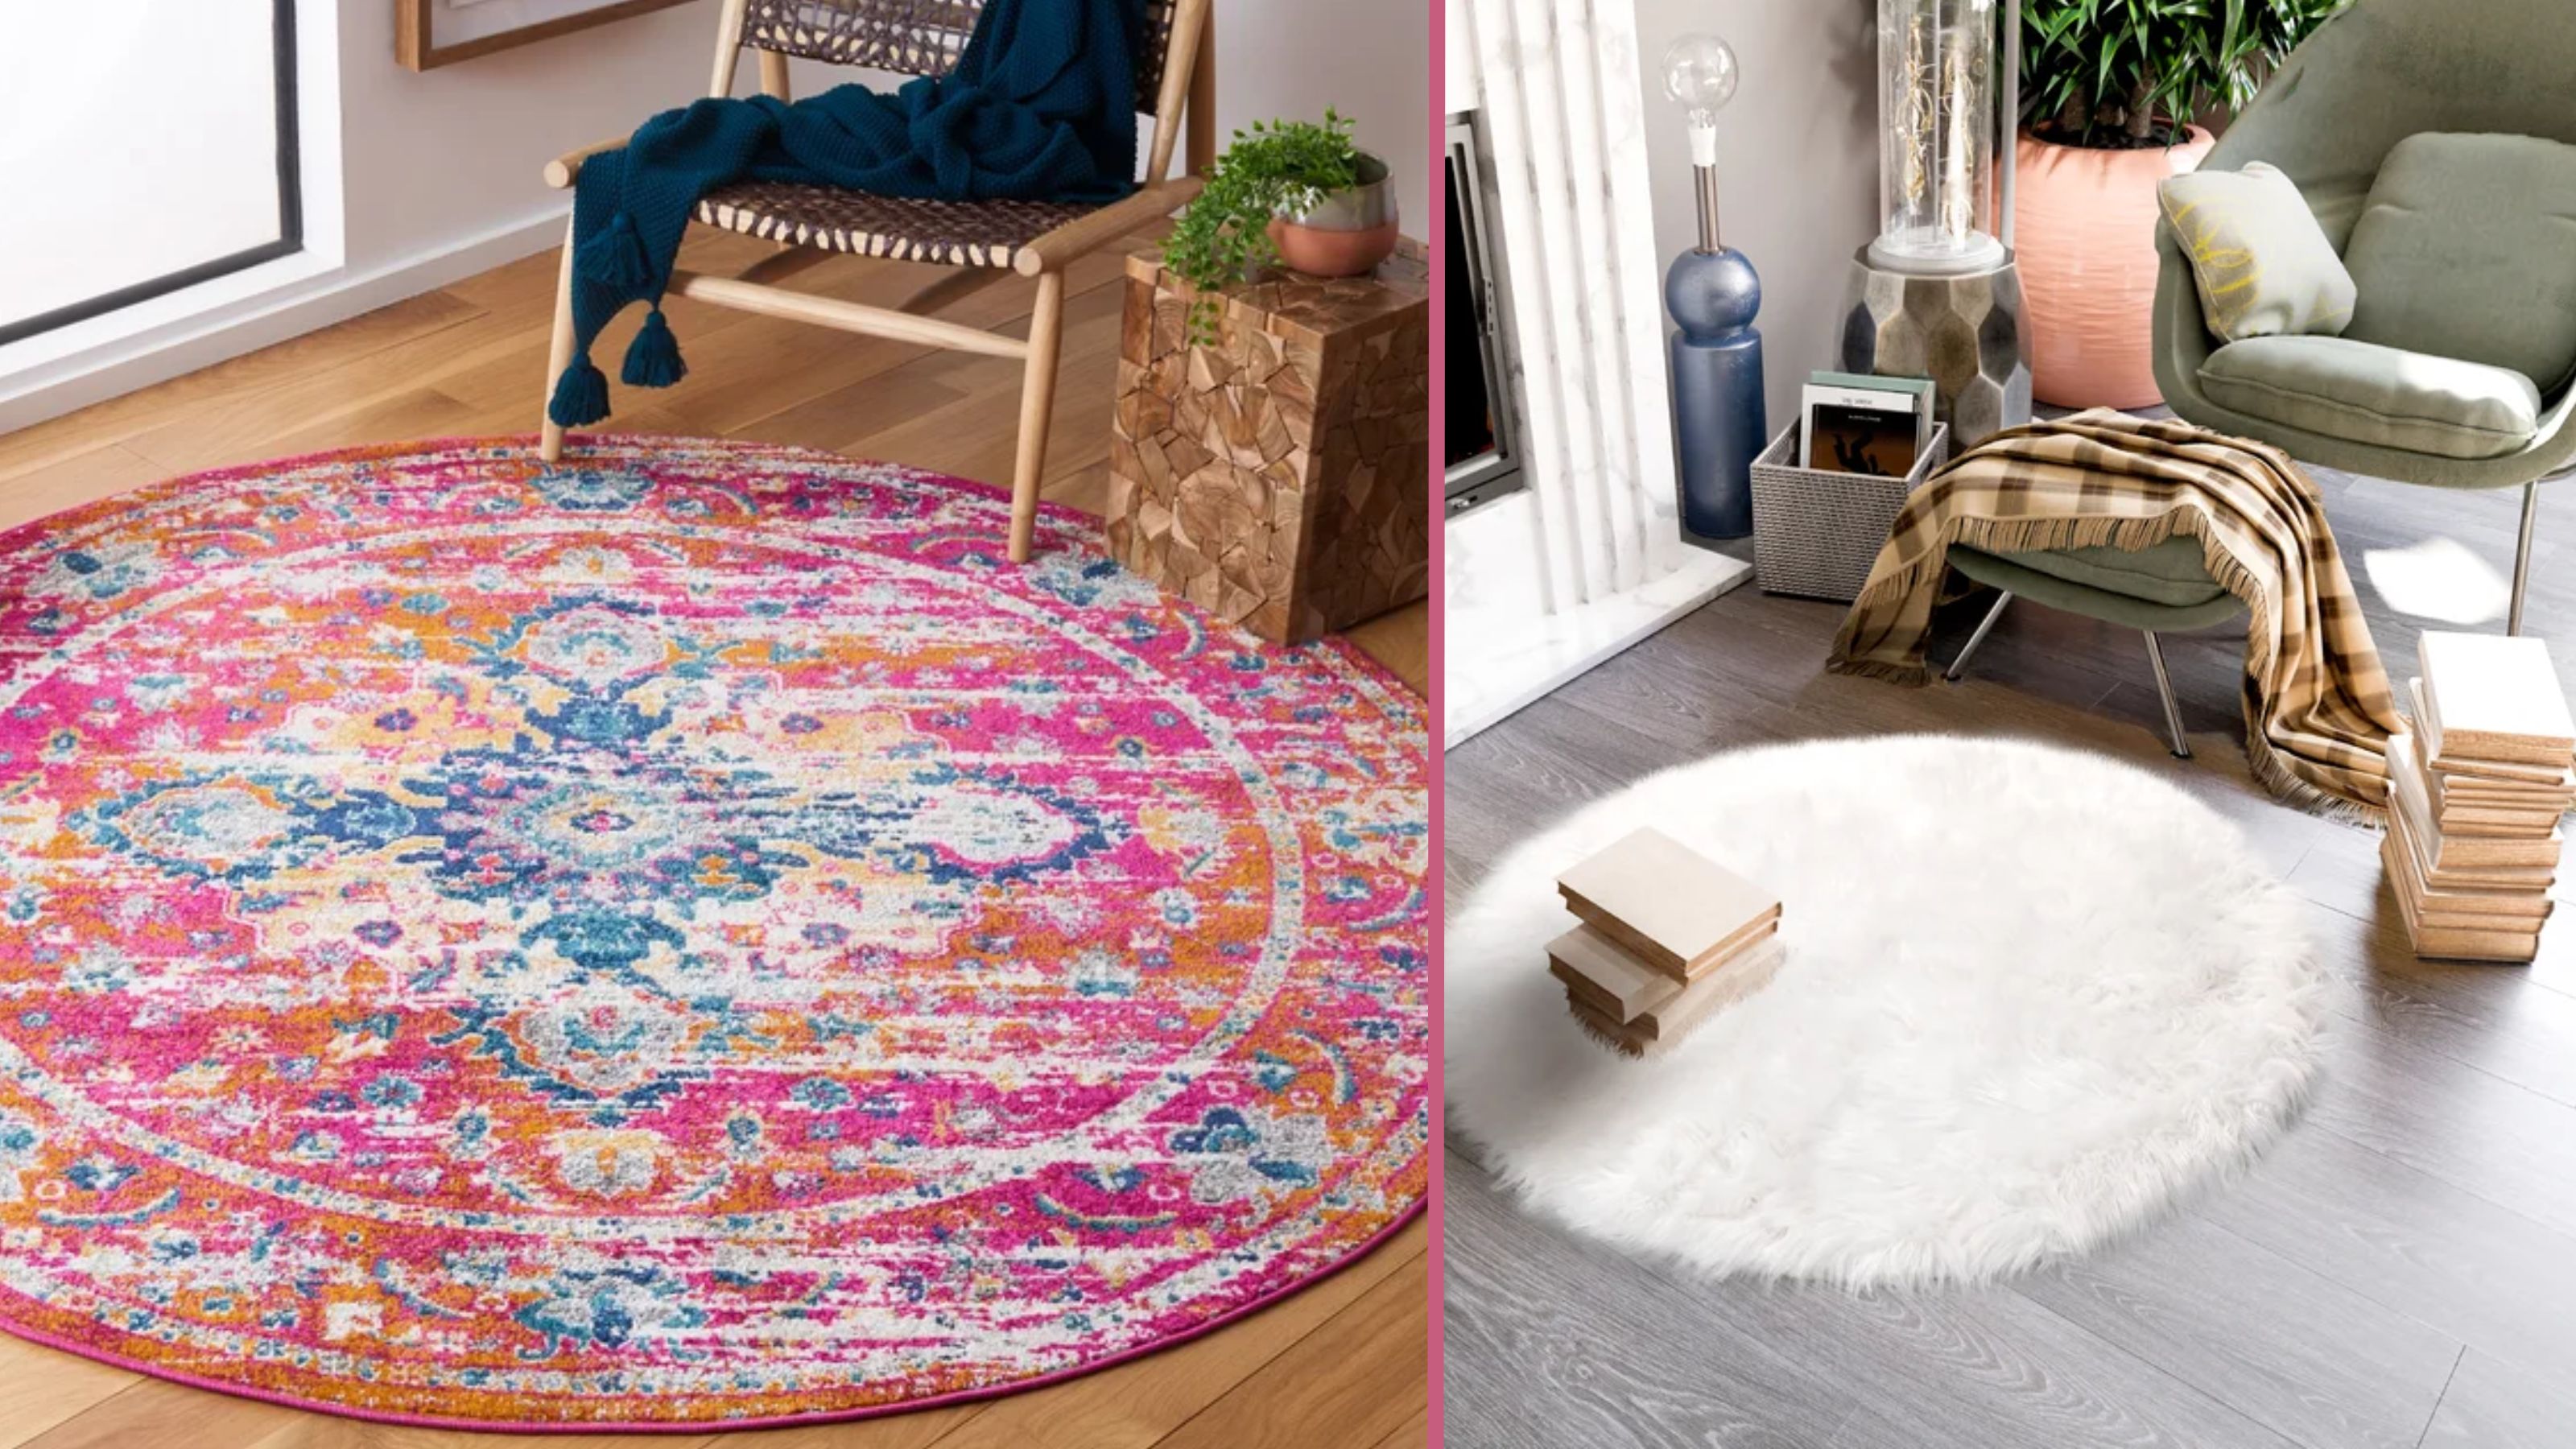 Statement Rugs Are the Bold Flooring Option Everyone Is Loving Right Now